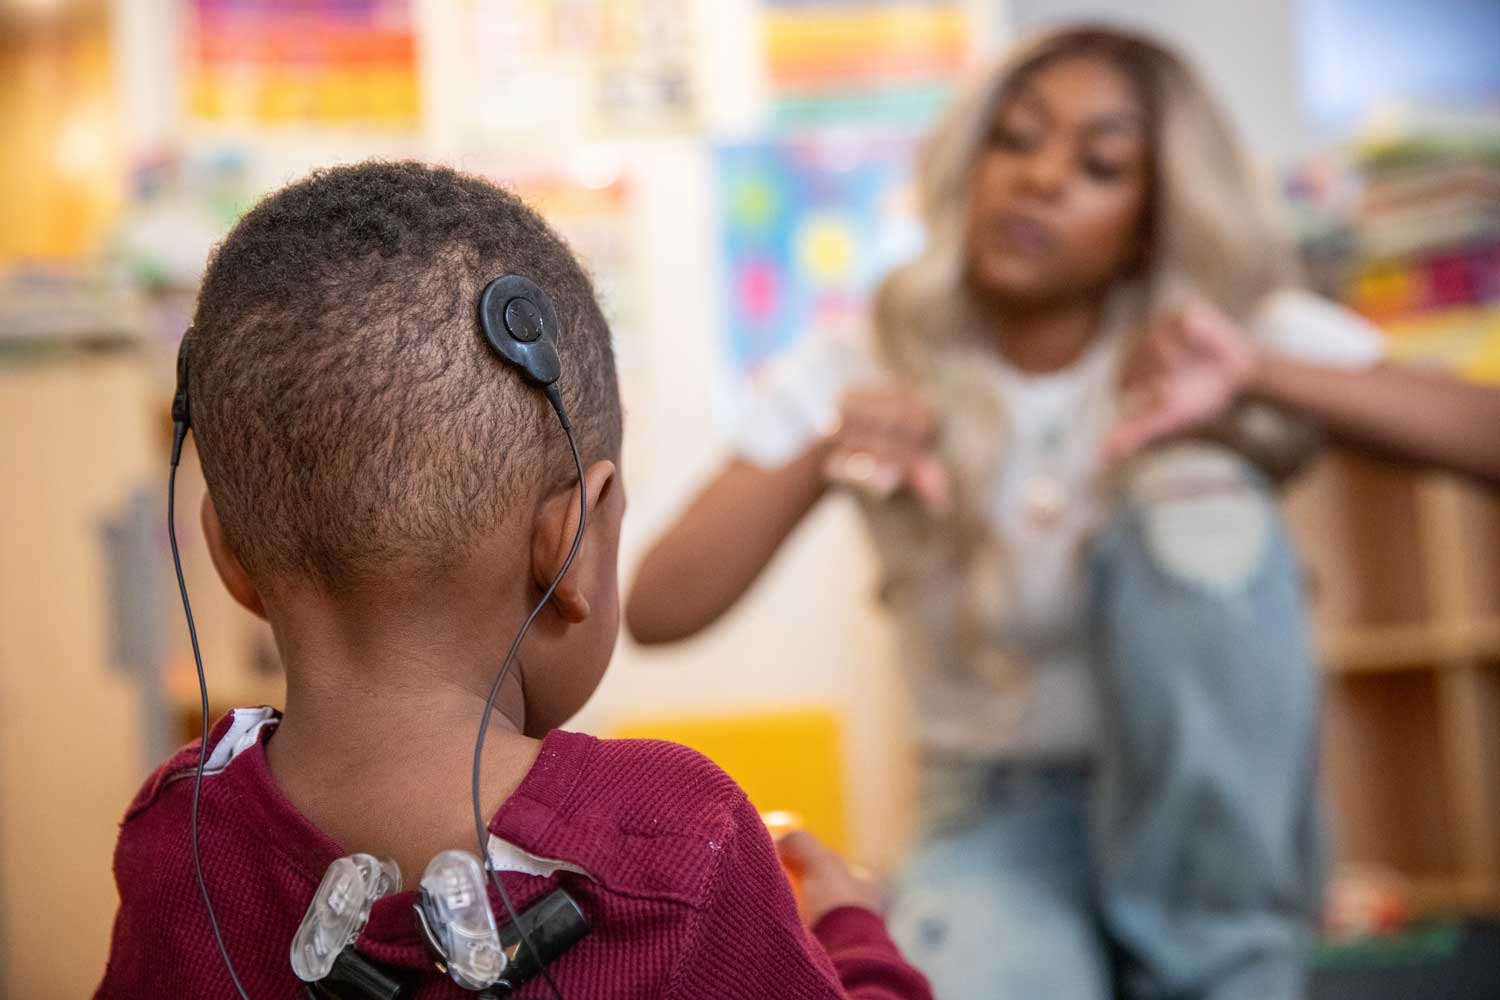 Amir, a toddler, wears two Cochlear implants on the back of his head. In the background, his mother Alisa communicates with him through sign language. He has a cochlear implant, as he became deaf after an infection. They are both of African American descent.